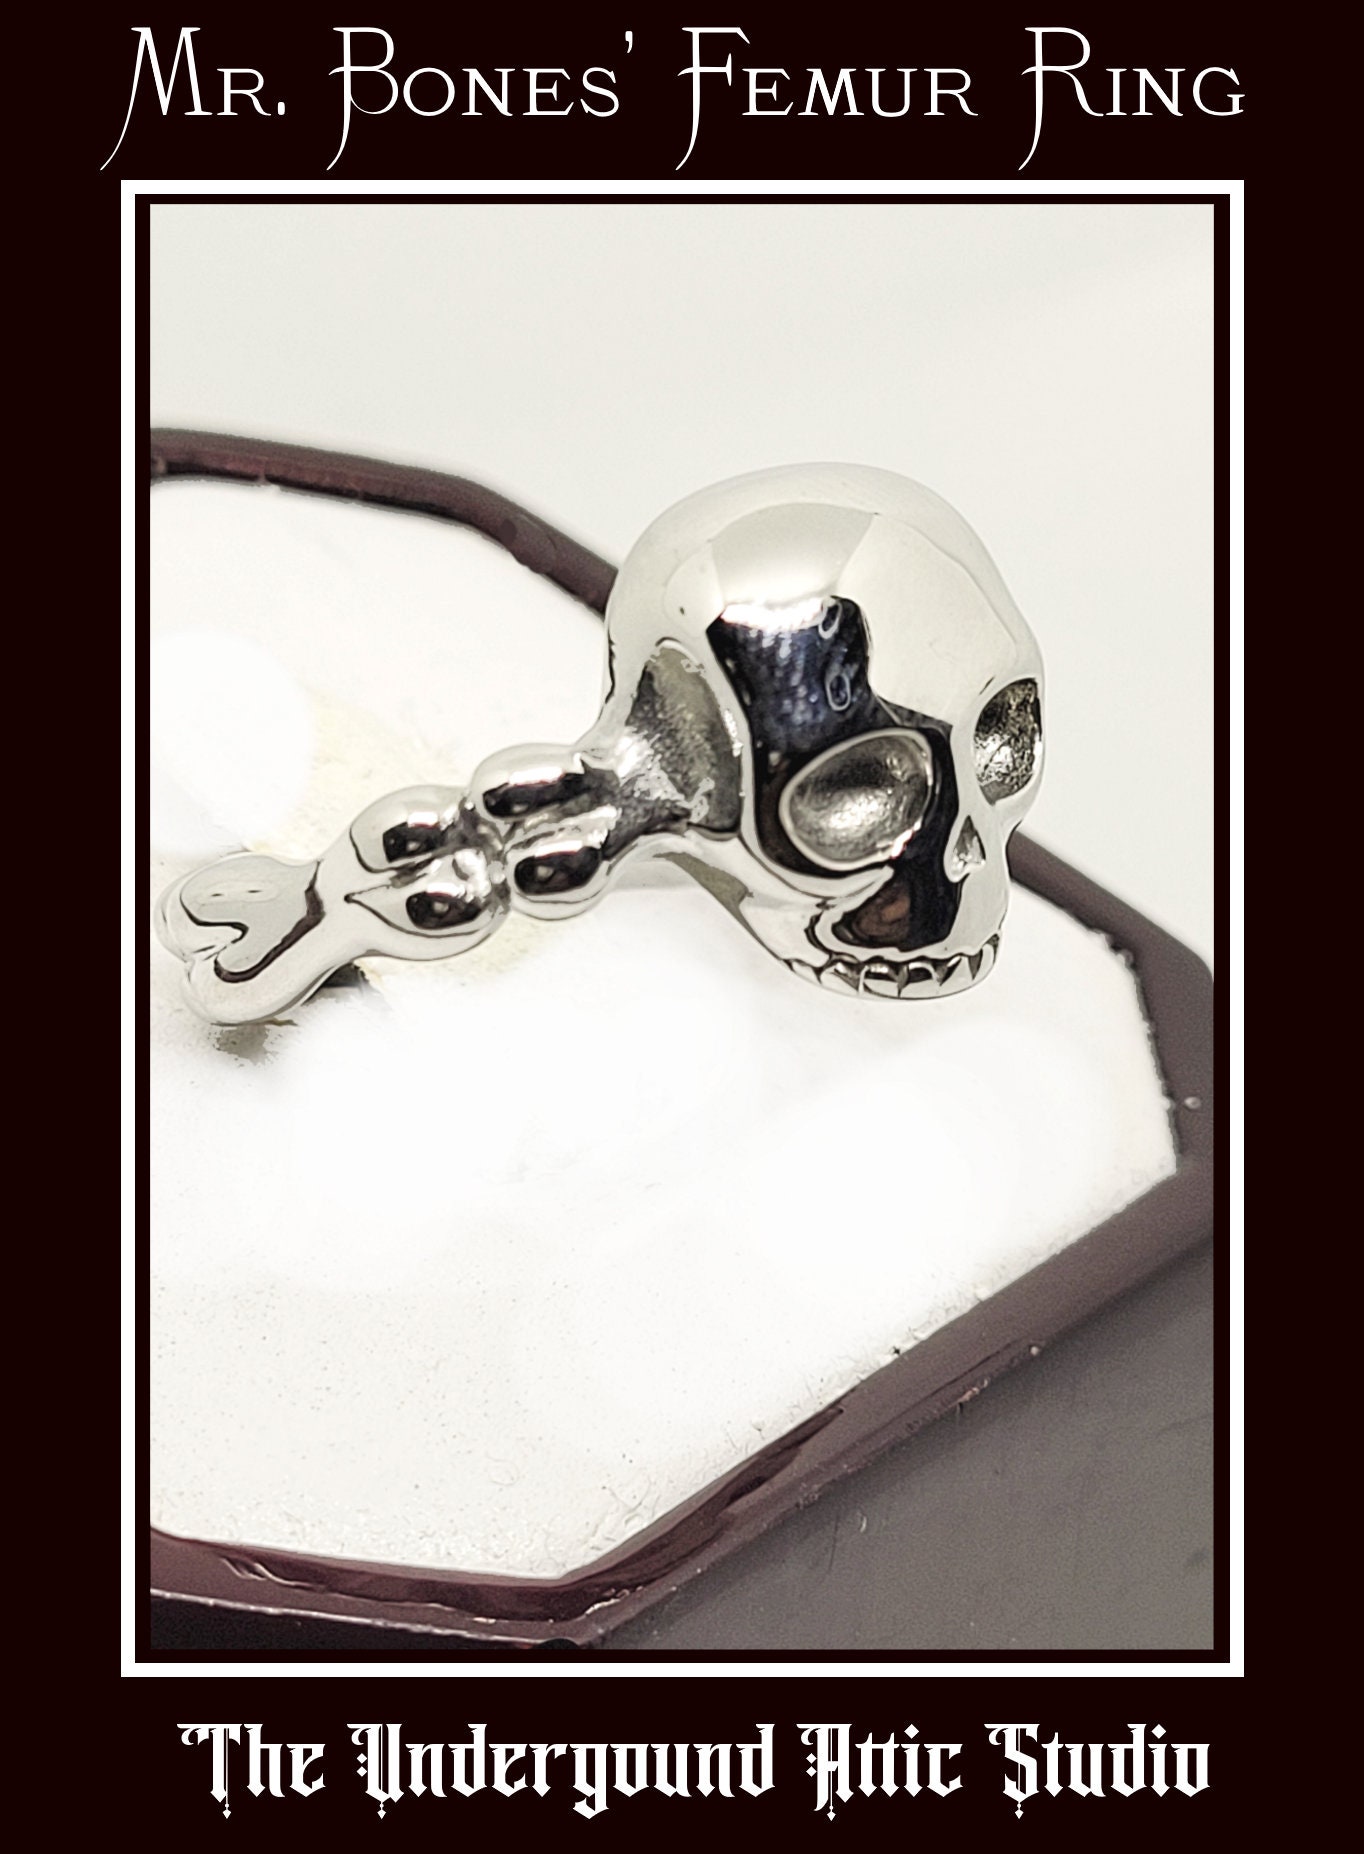 Tibia and Femur Ring in Pewter, Bone Ring, Medical Jewelry